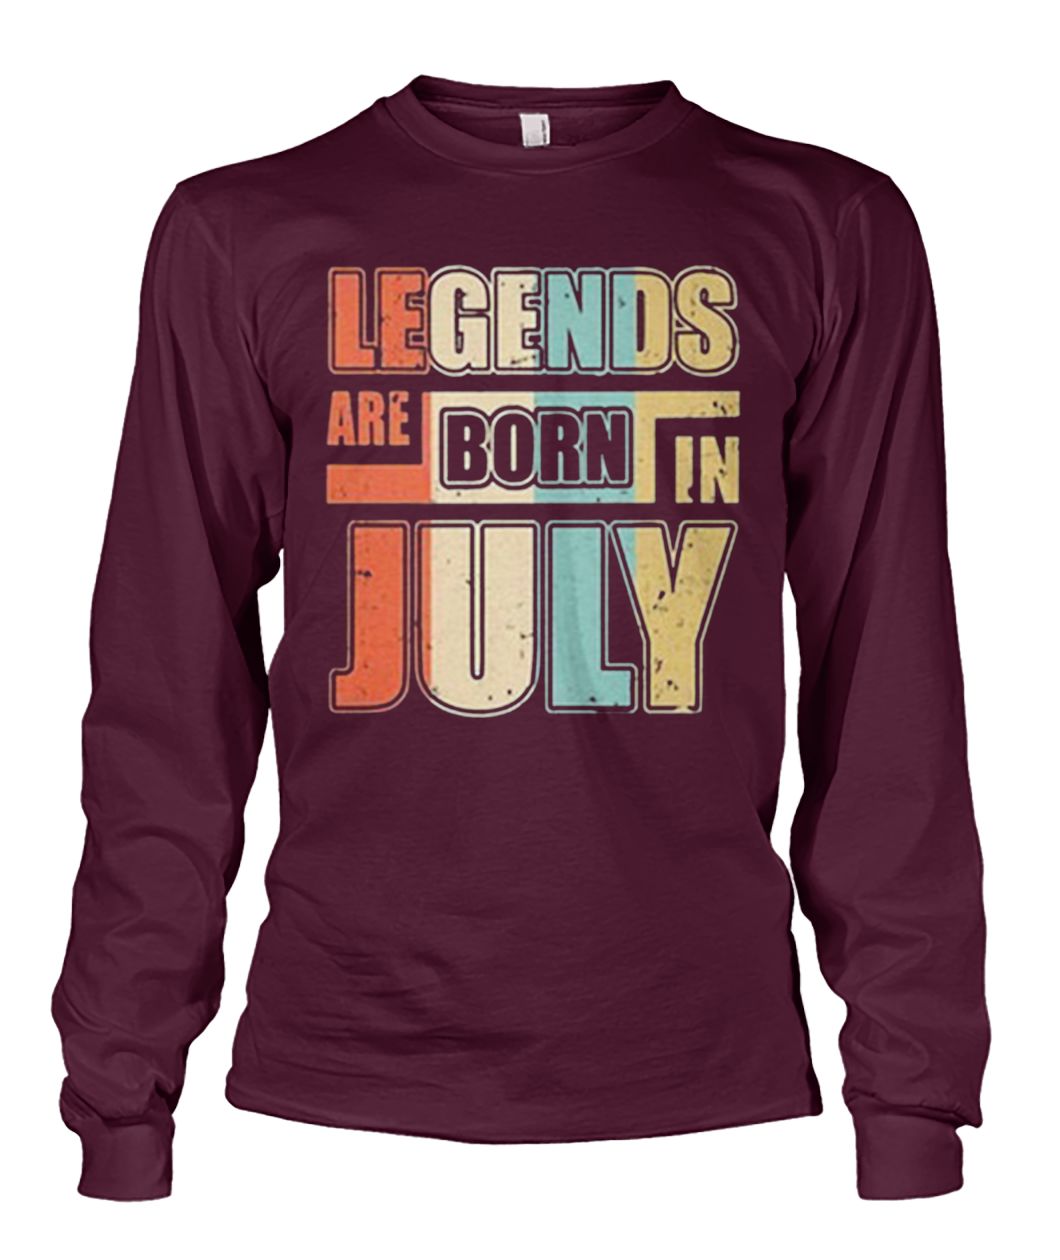 Vintage legends are born in july unisex long sleeve